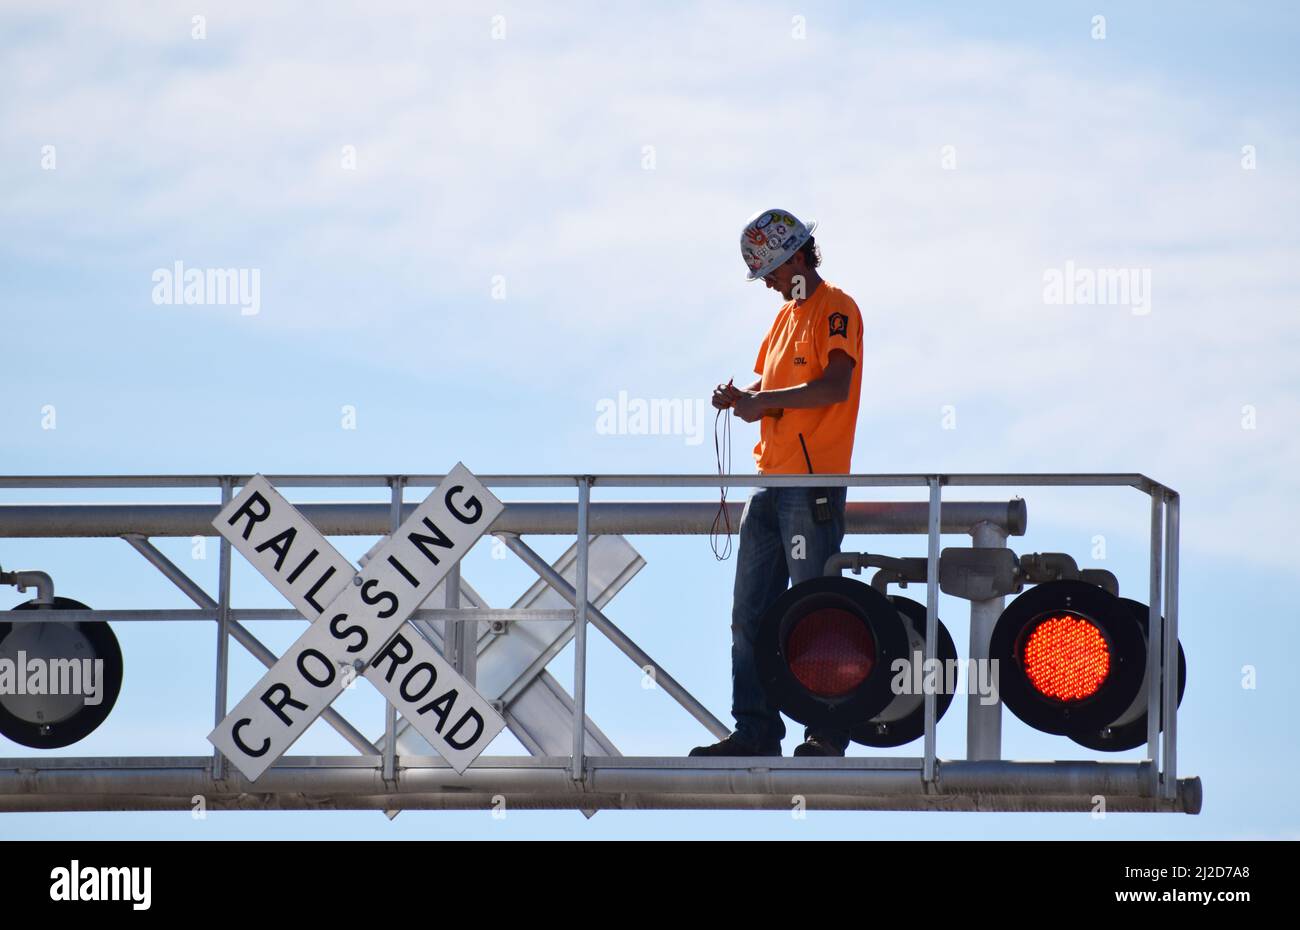 A man working on a railroad crossing light in the small town DeLeon Texas - November 2021 Stock Photo